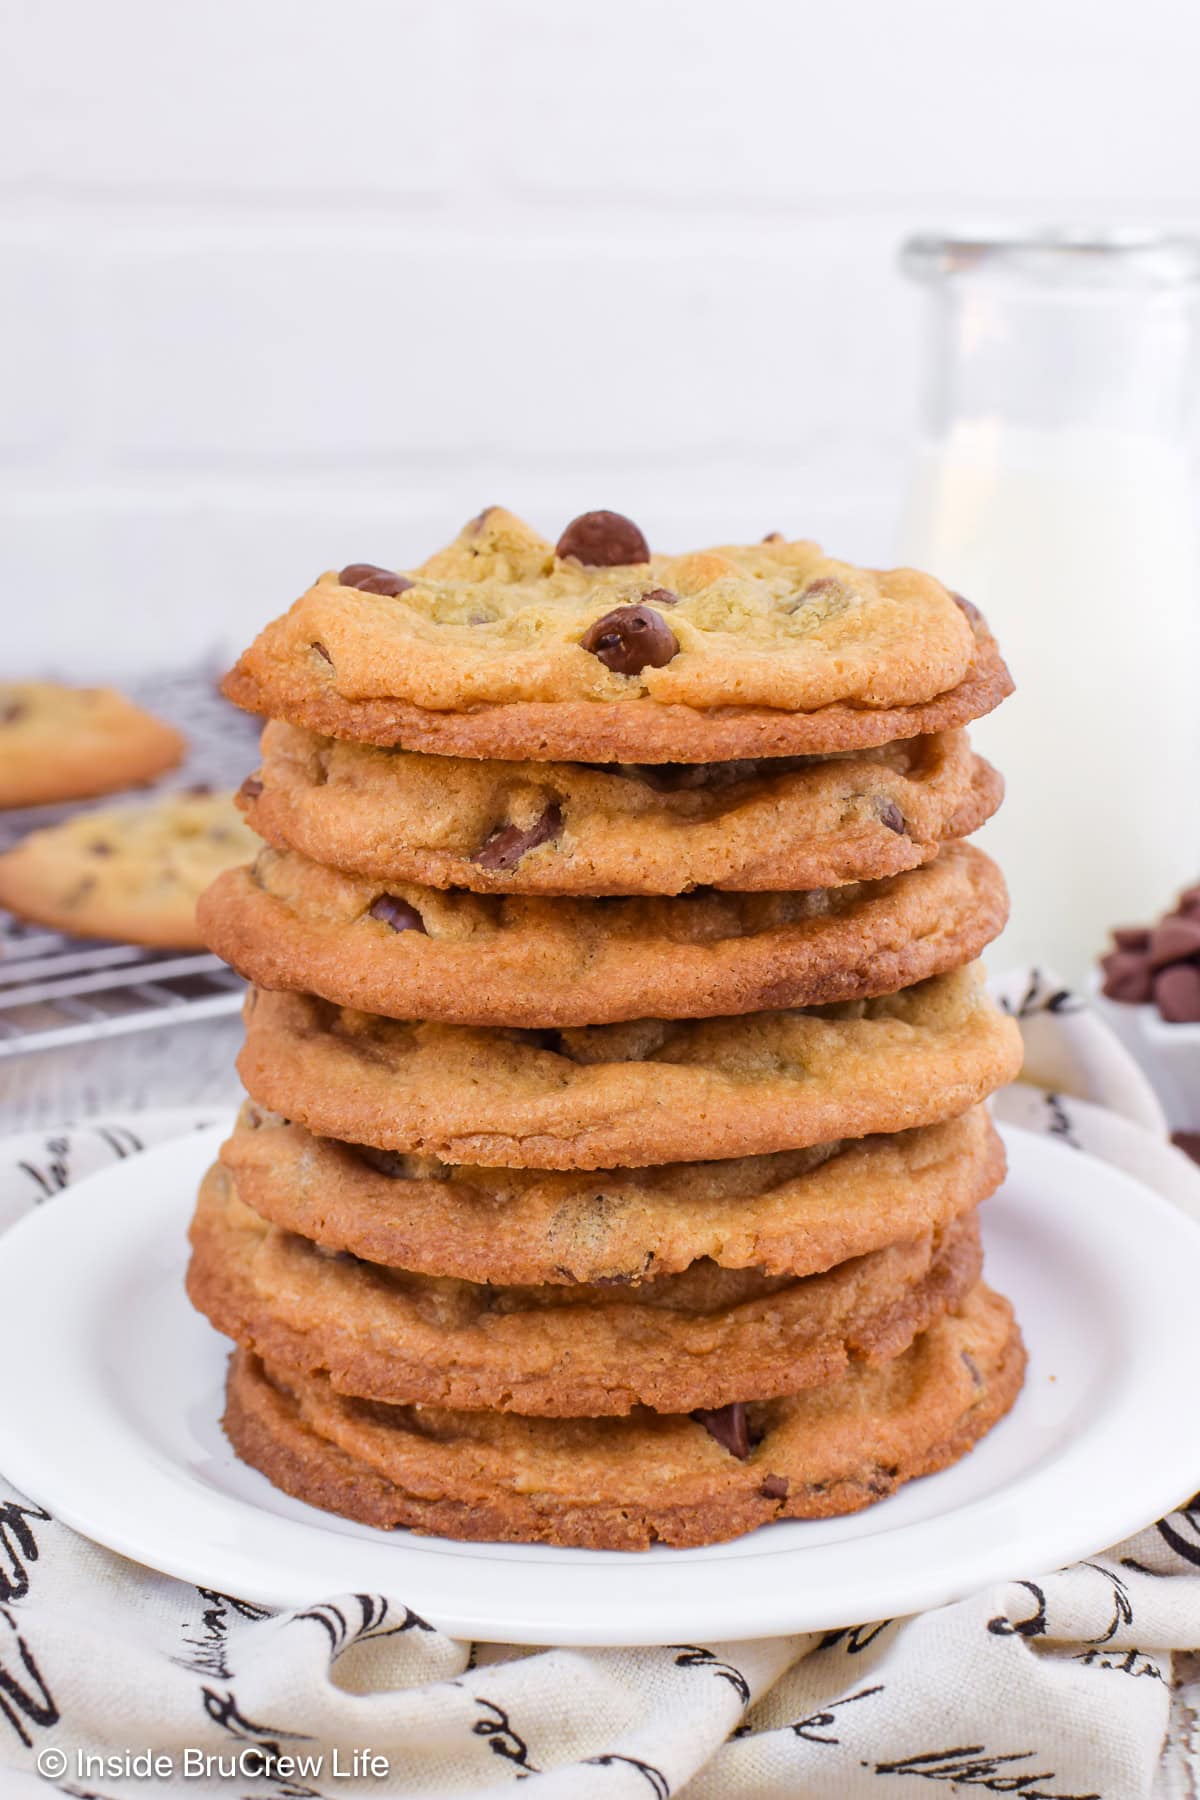 A tall stack of crispy and chewy chocolate chip cookies on a plate.